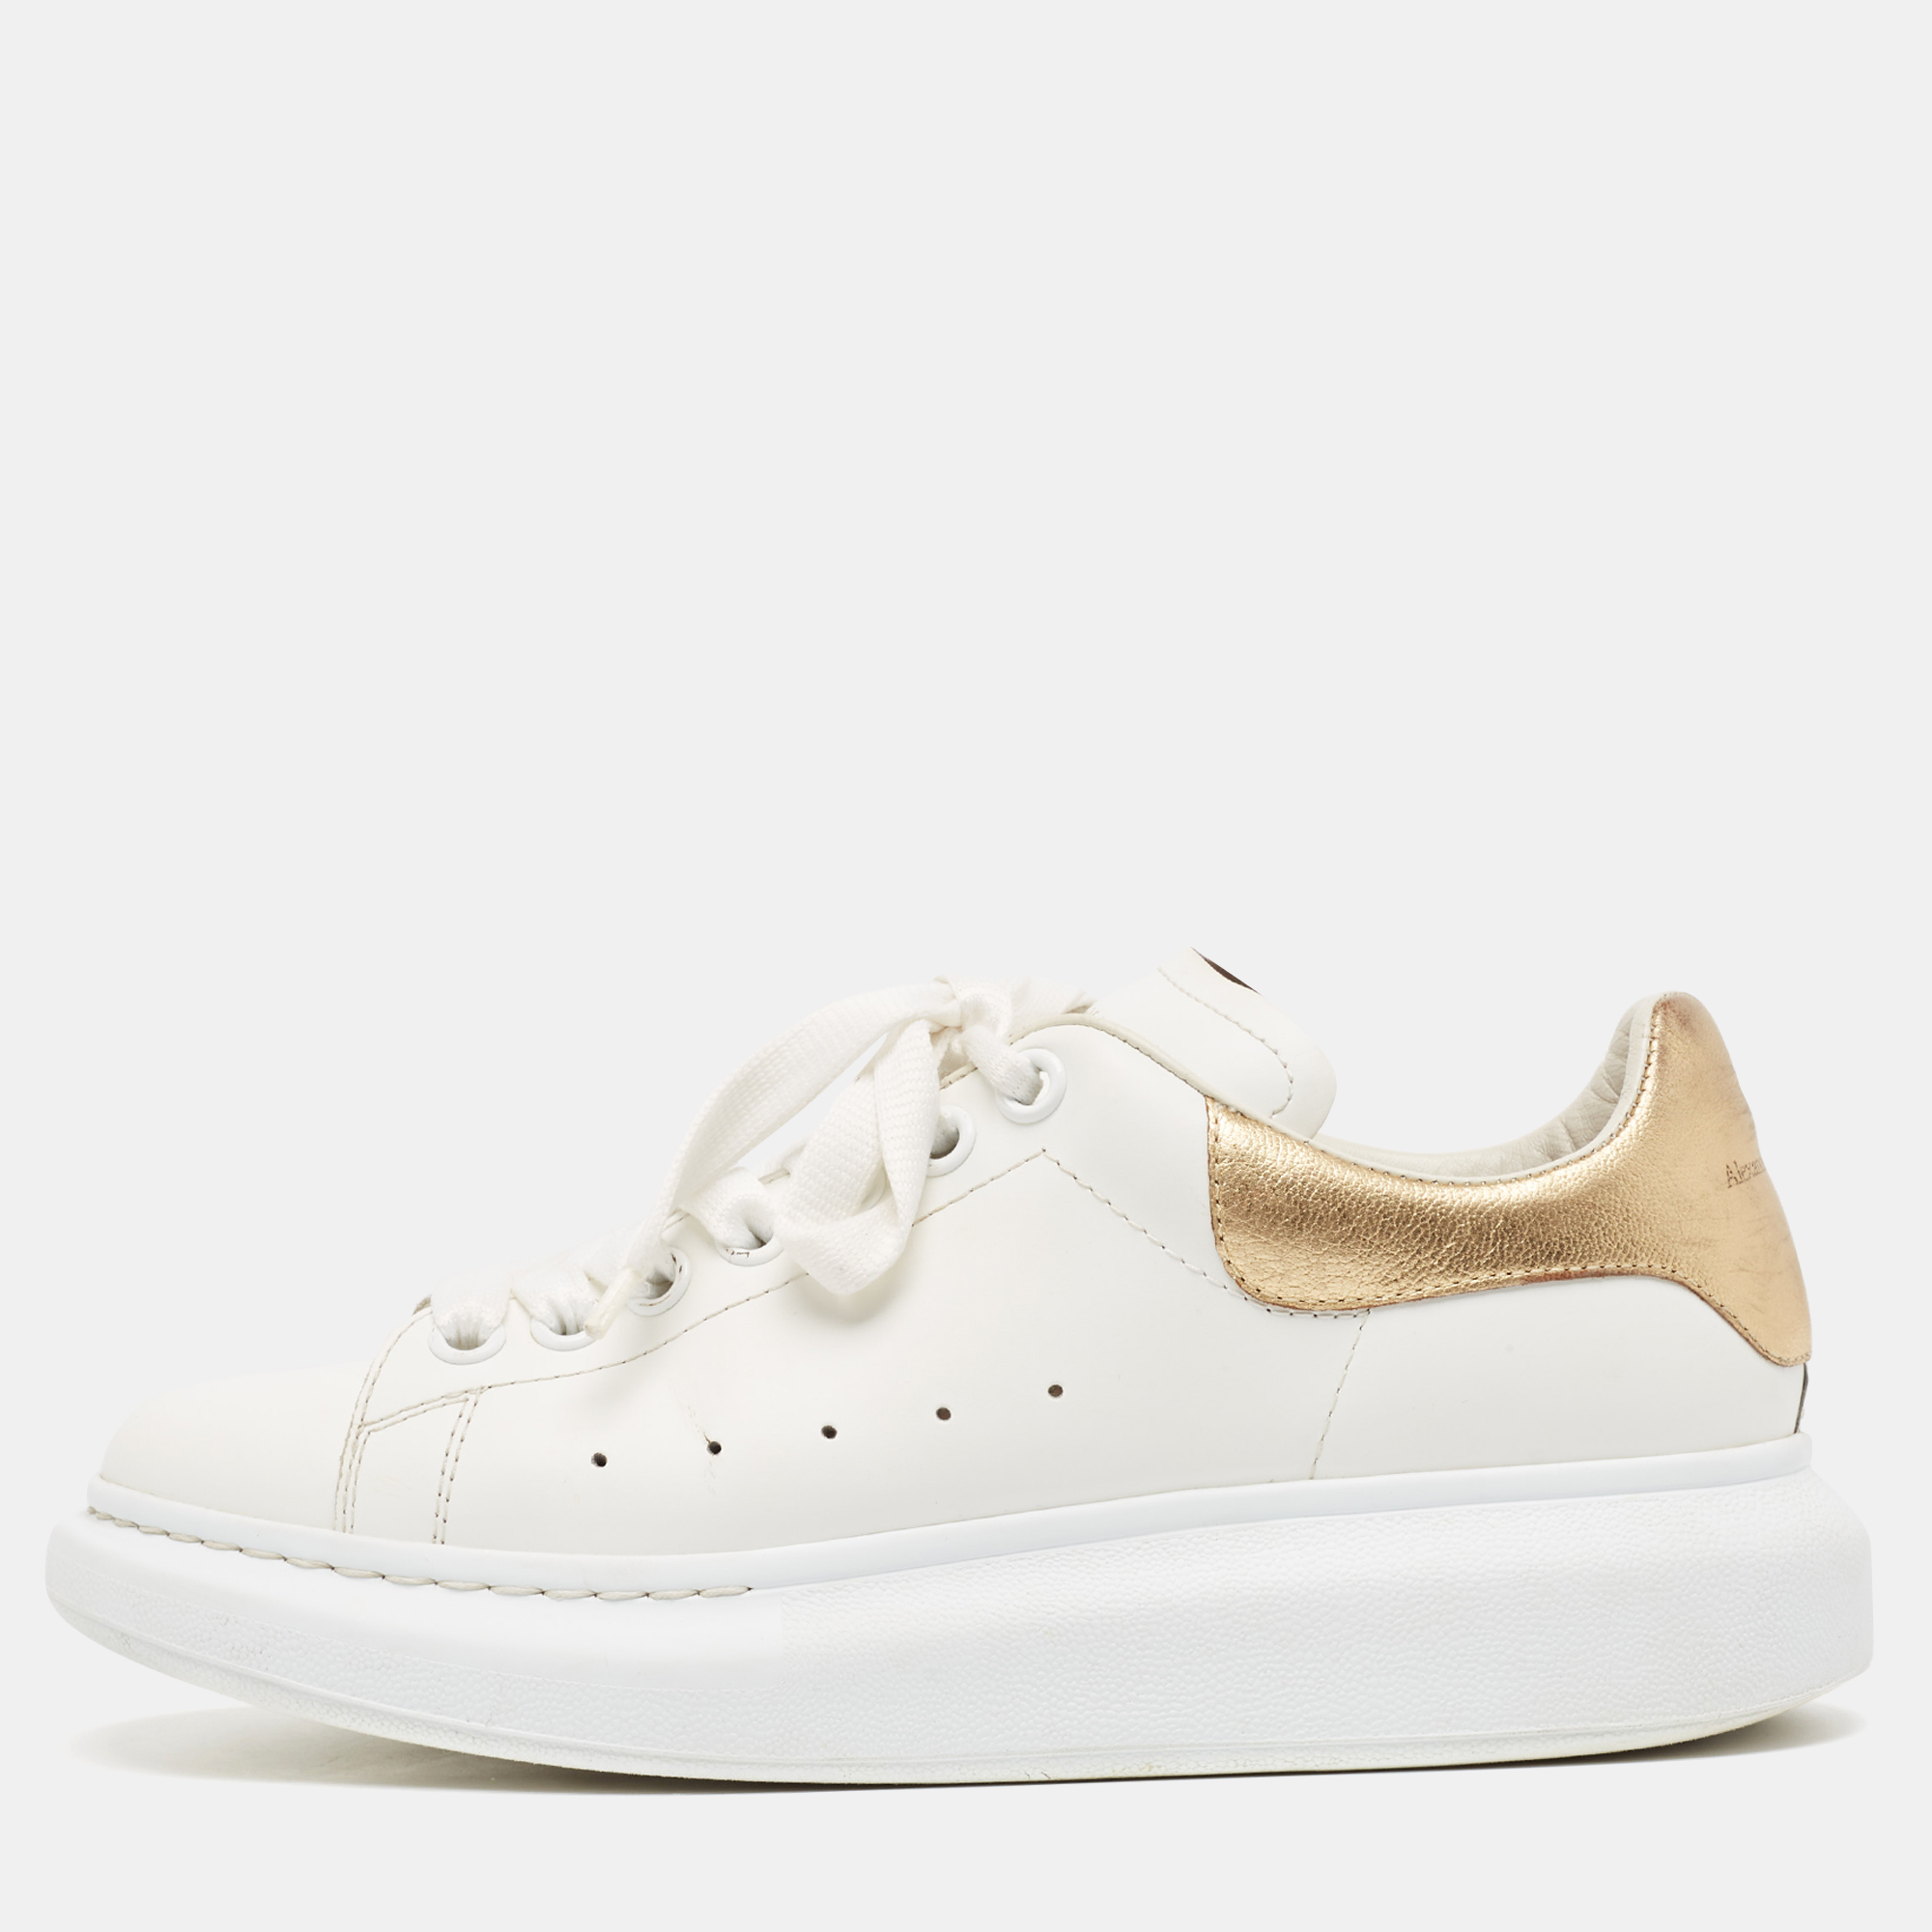 Alexander mcqueen white/gold leather oversized sneakers size 39